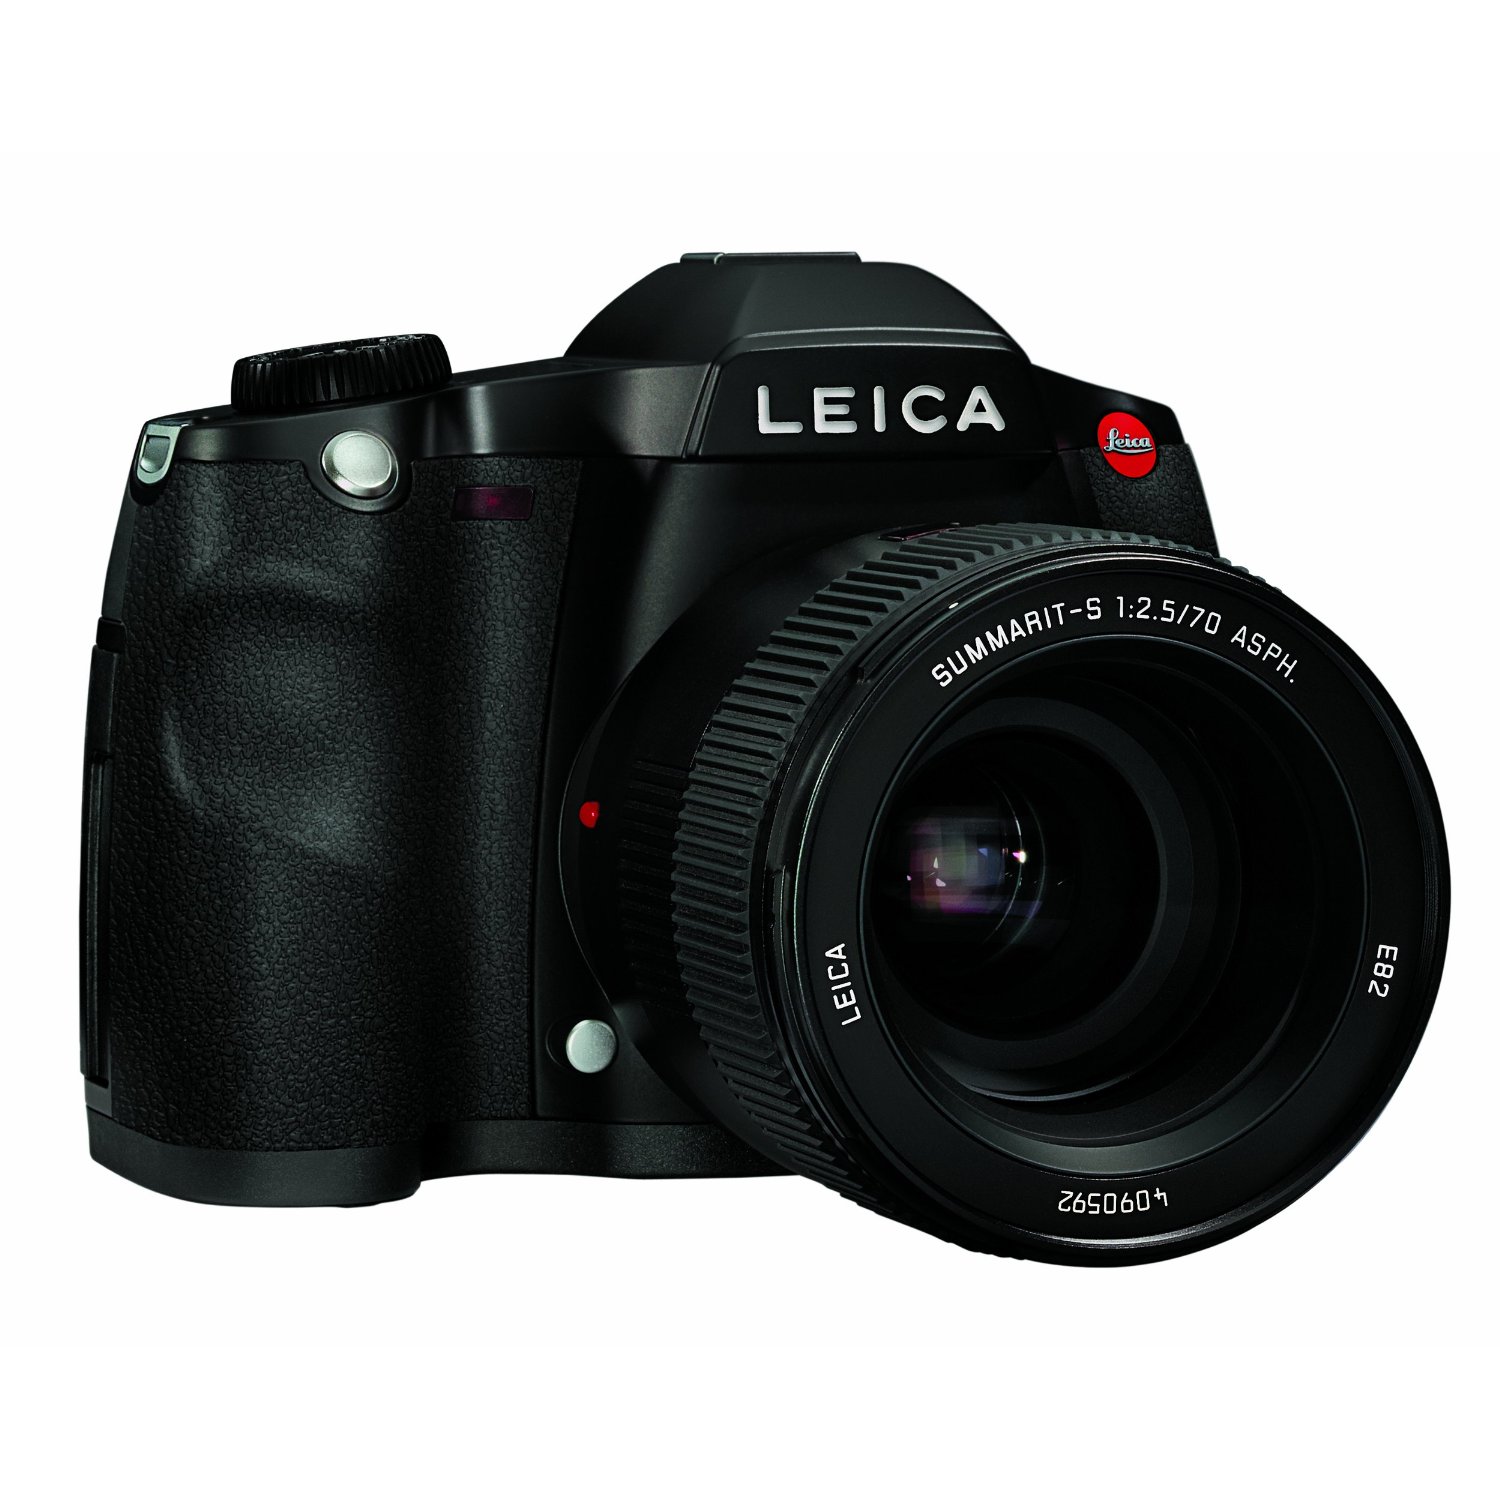 http://thetechjournal.com/wp-content/uploads/images/1109/1316325950-leica-s2-375mp-interchangeable-lens-camera-cost-28000-2.jpg